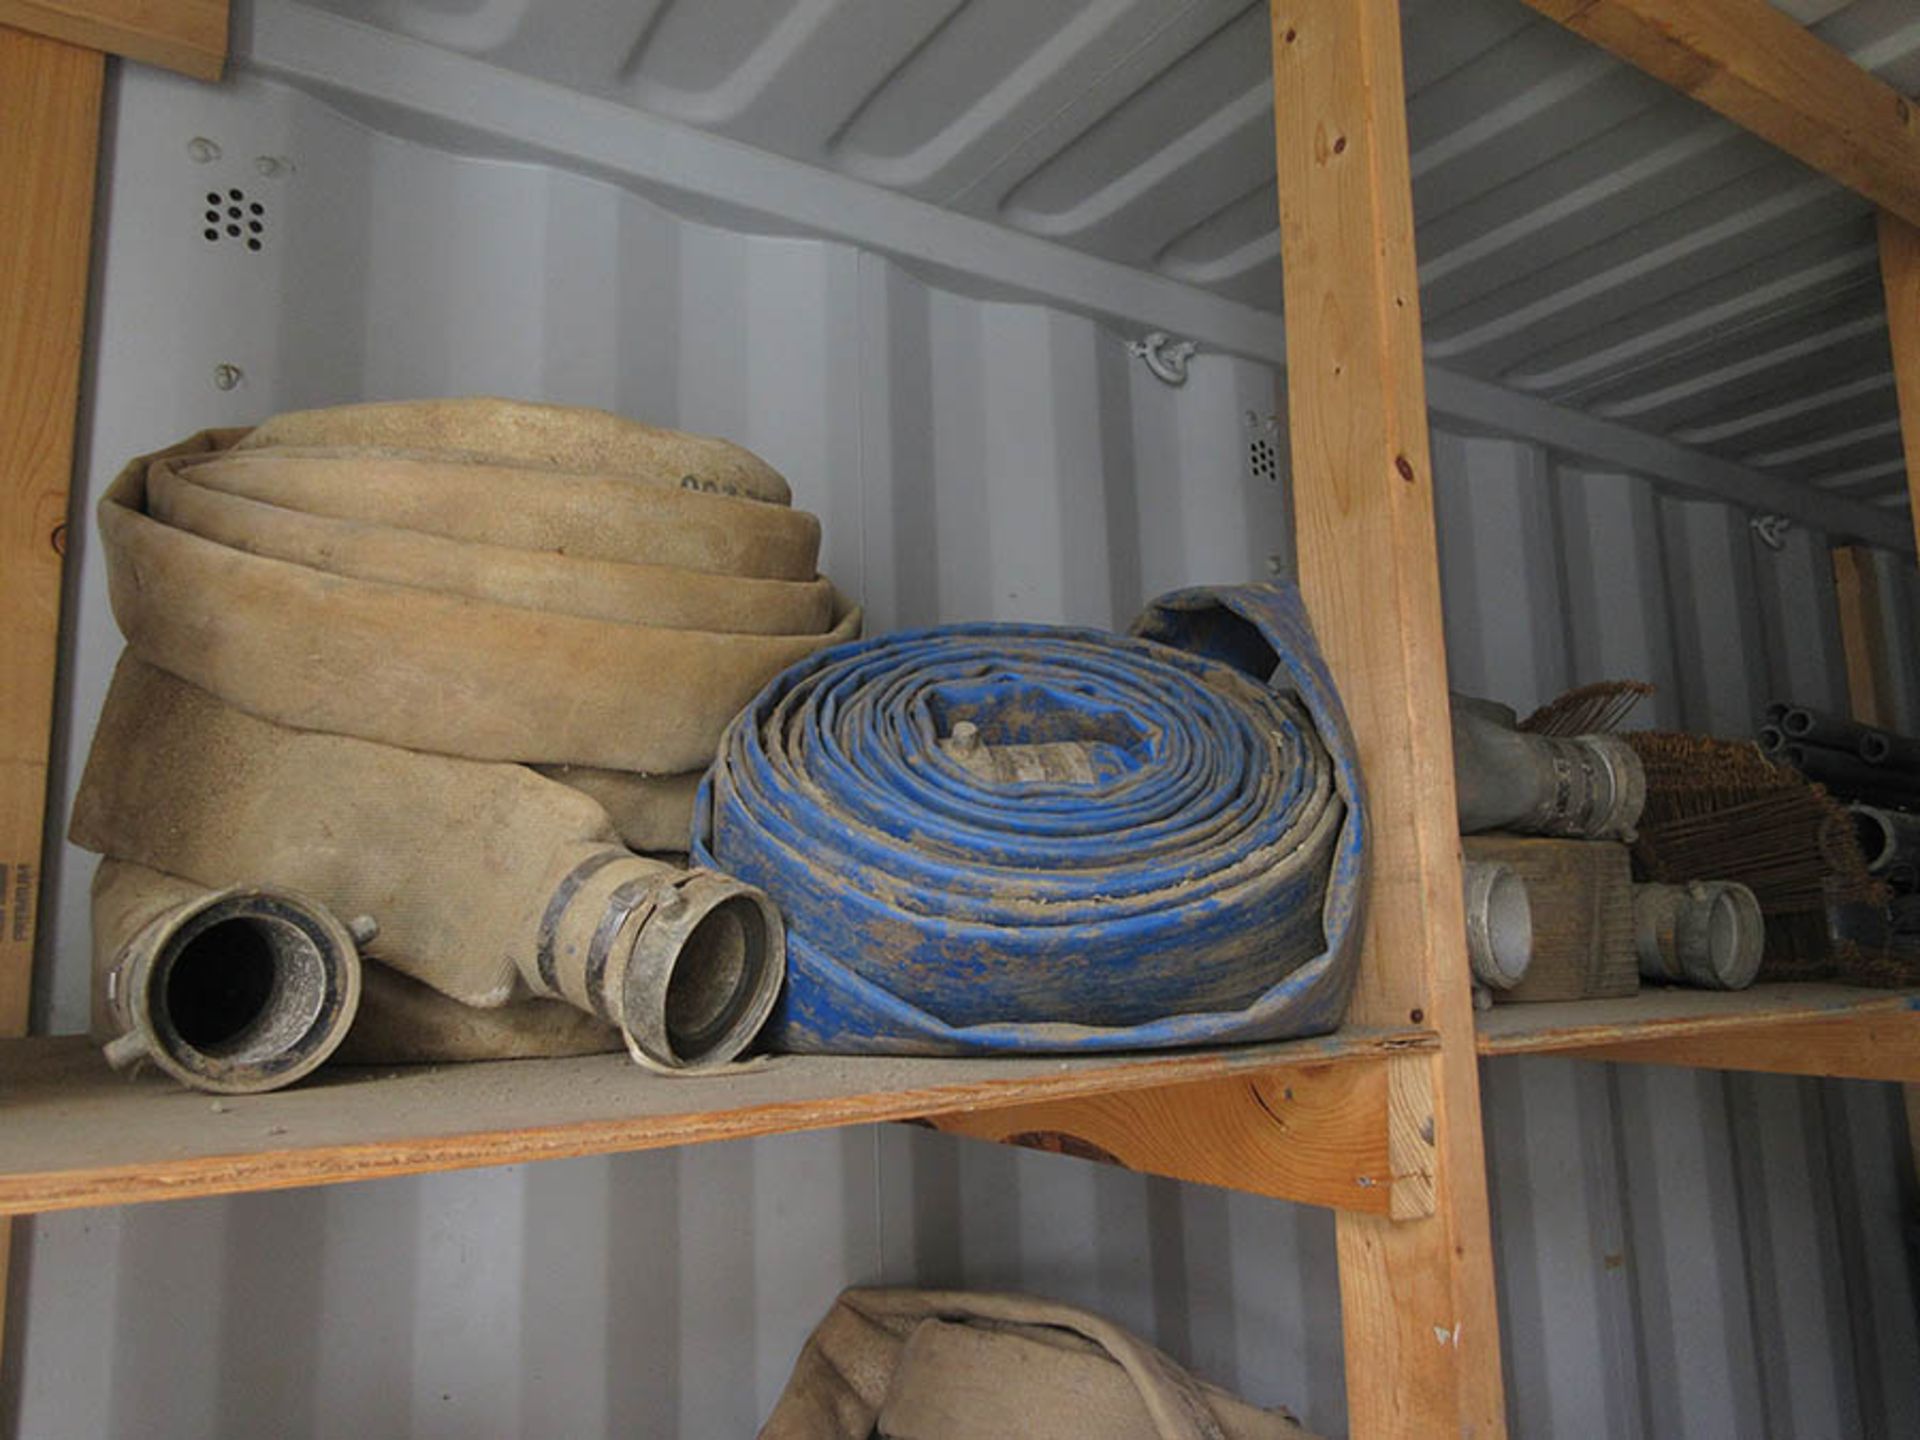 CONTENTS OF CONTAINER - ASSORTED DISCHARGE HOSE, TORCH HOSES, DRILL, AND FISH TAPE SPOOL - Image 2 of 10